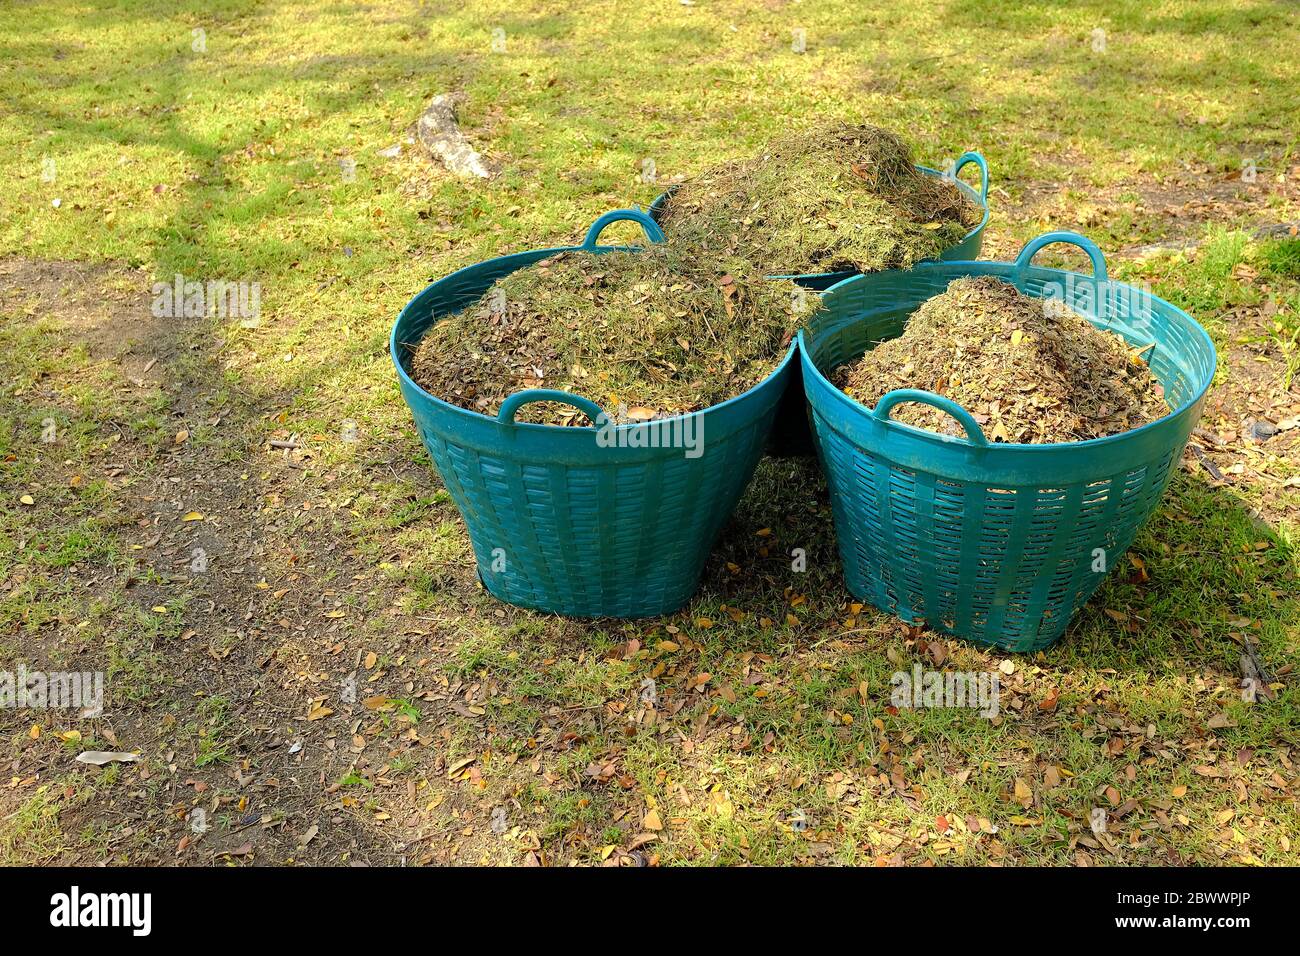 Dry leaves for Making Organic Fertilizer in the Green Plastic Baskets. Stock Photo